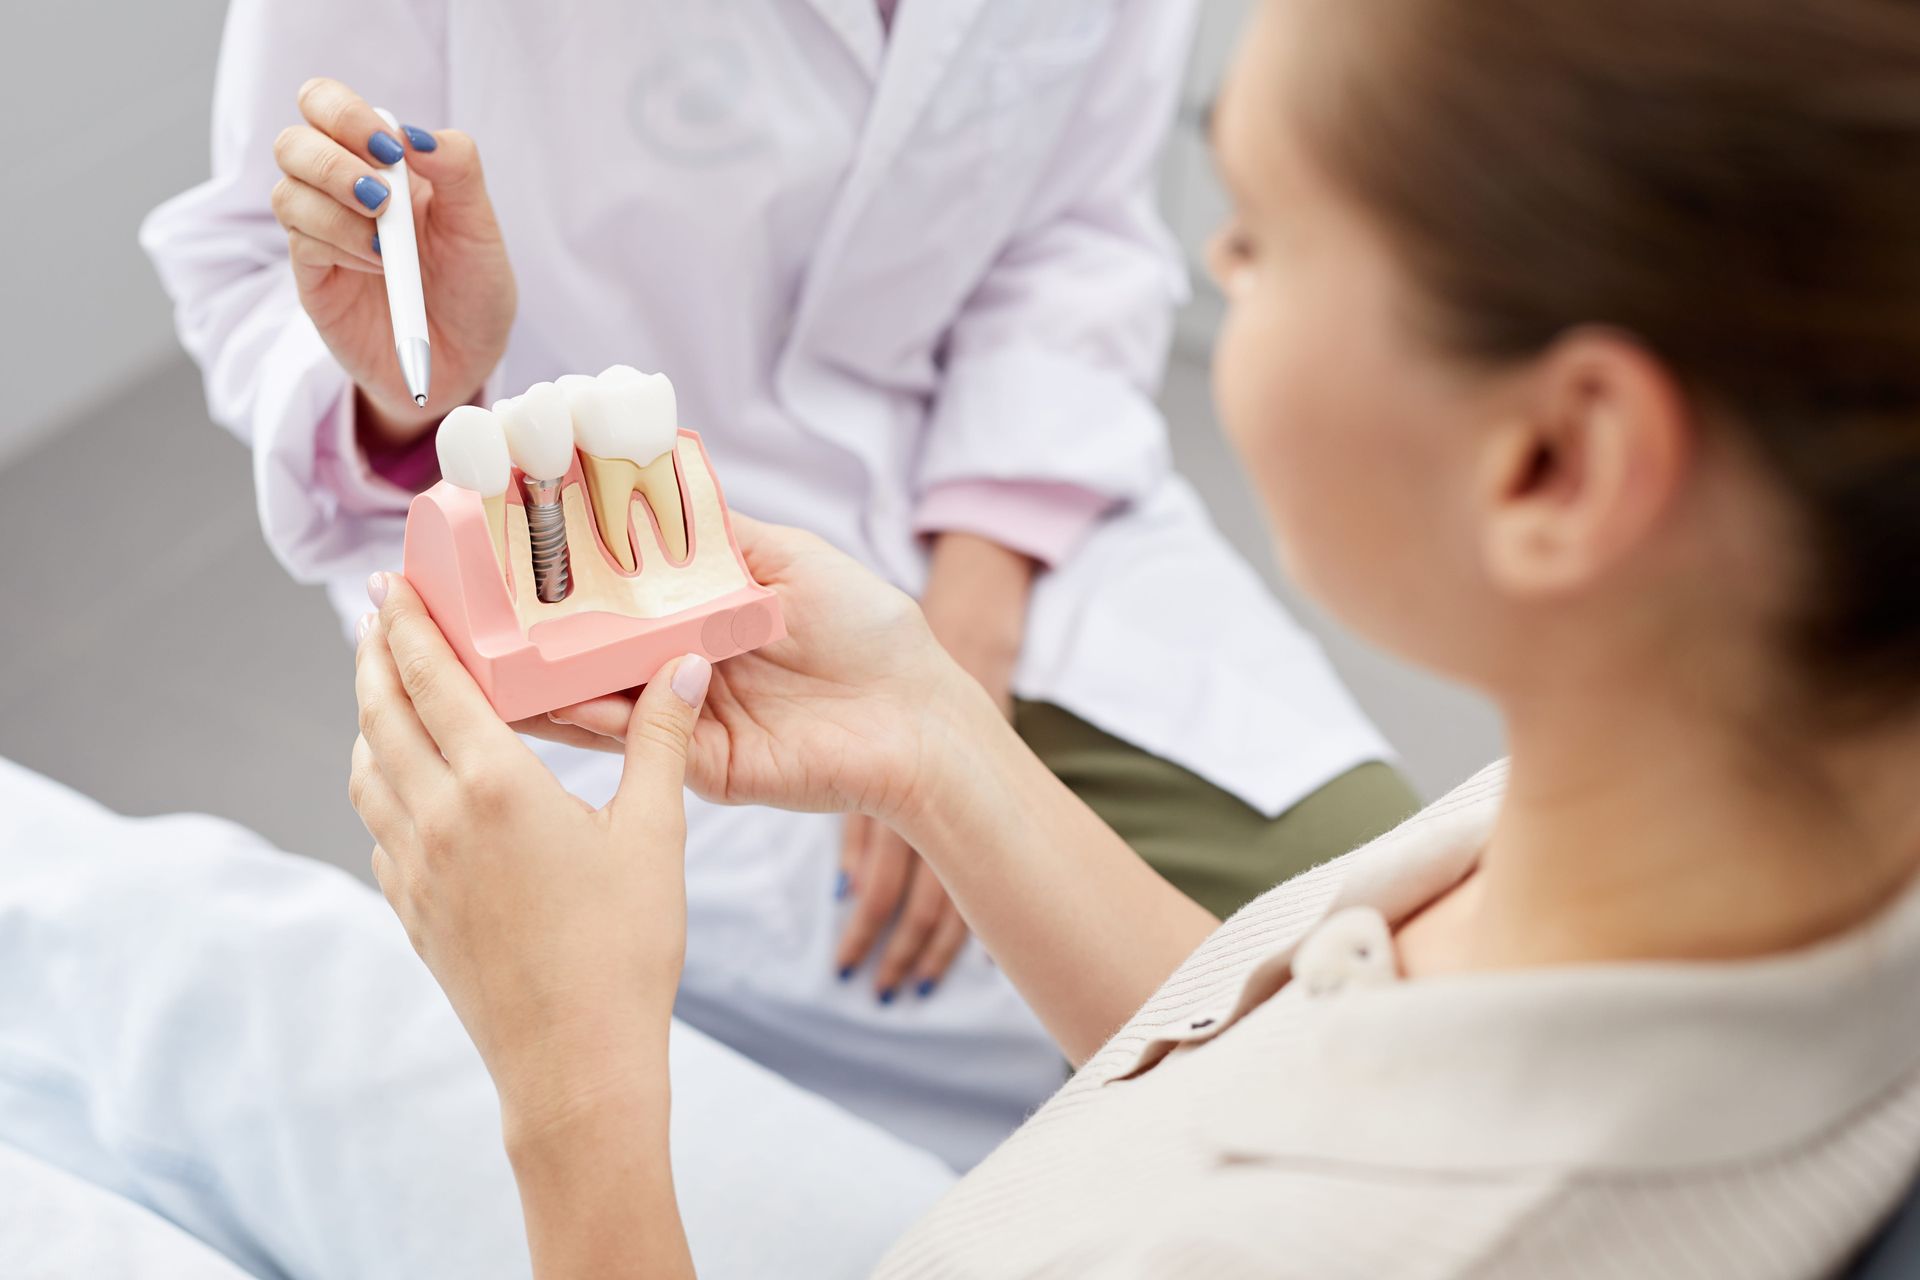 Bleeding After Dental Implants: What's Considered Normal?